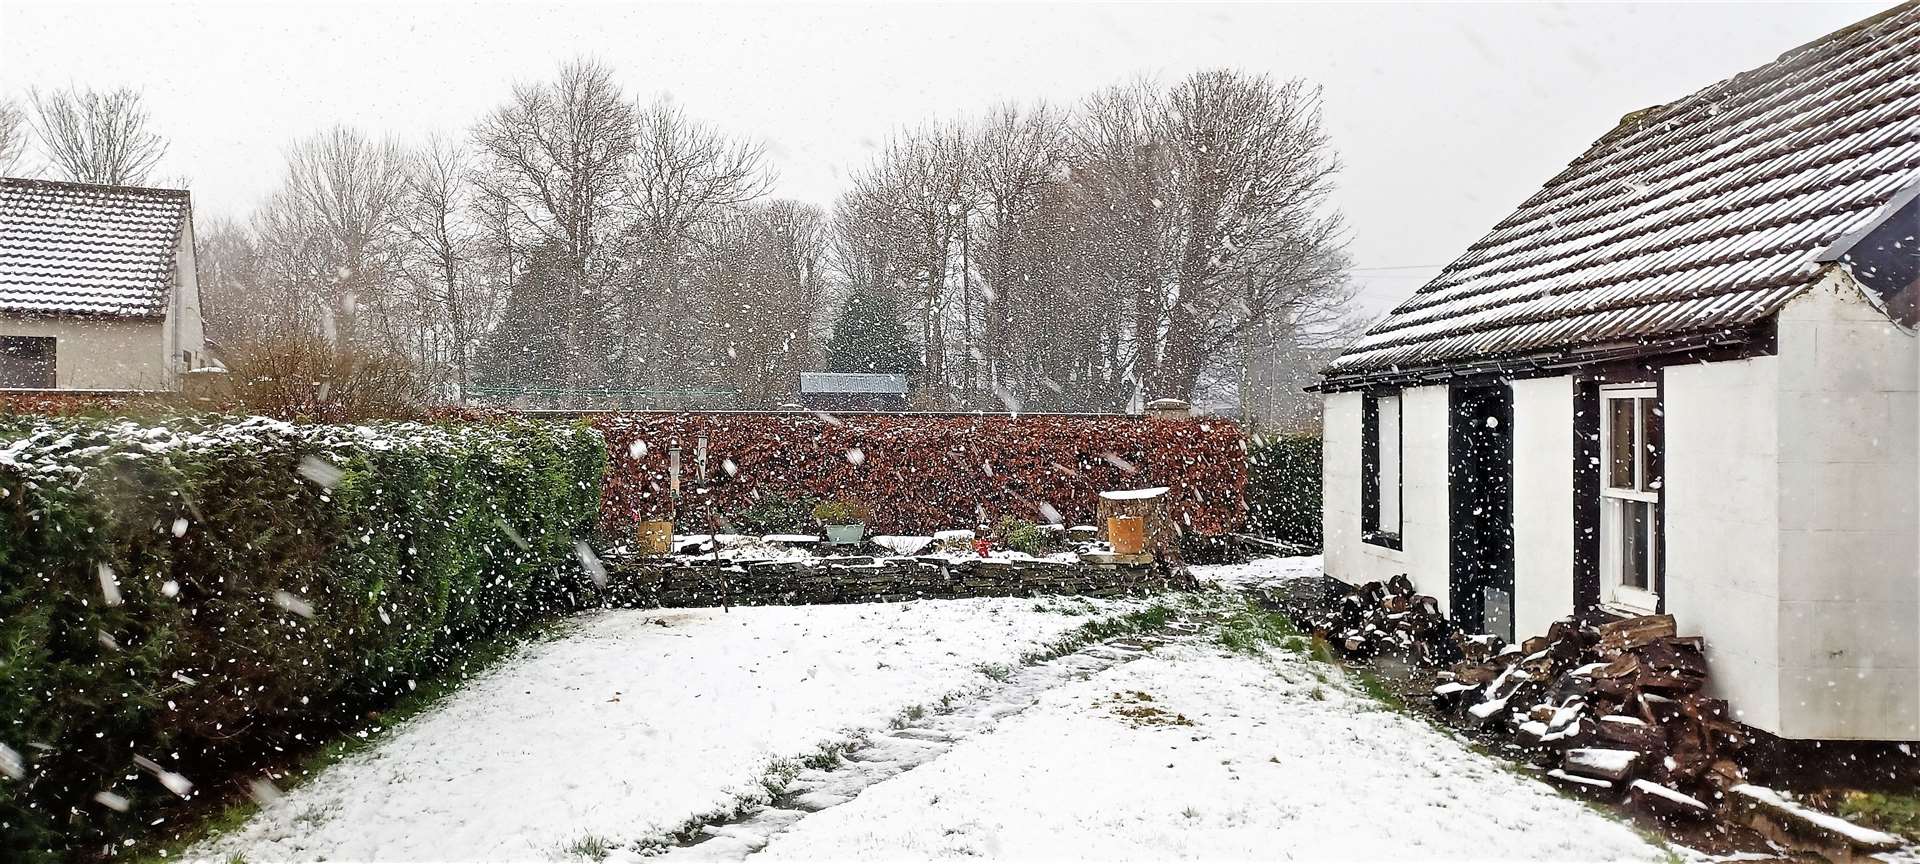 Snow in Watten on February 4. Picture: DGS